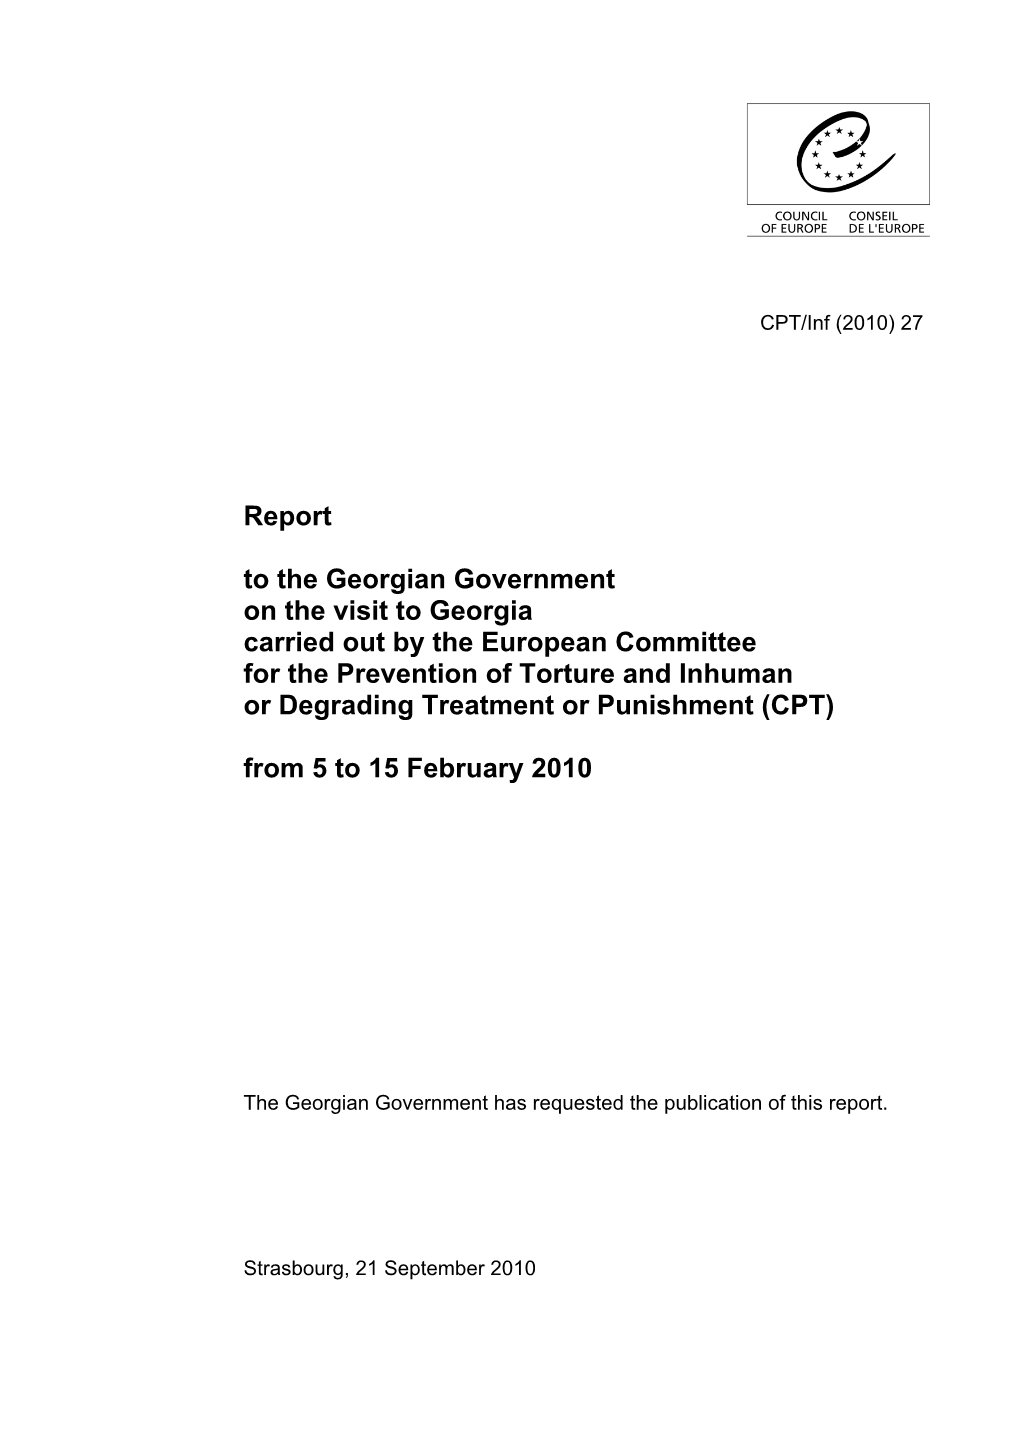 Report to the Georgian Government on the Visit to Georgia Carried